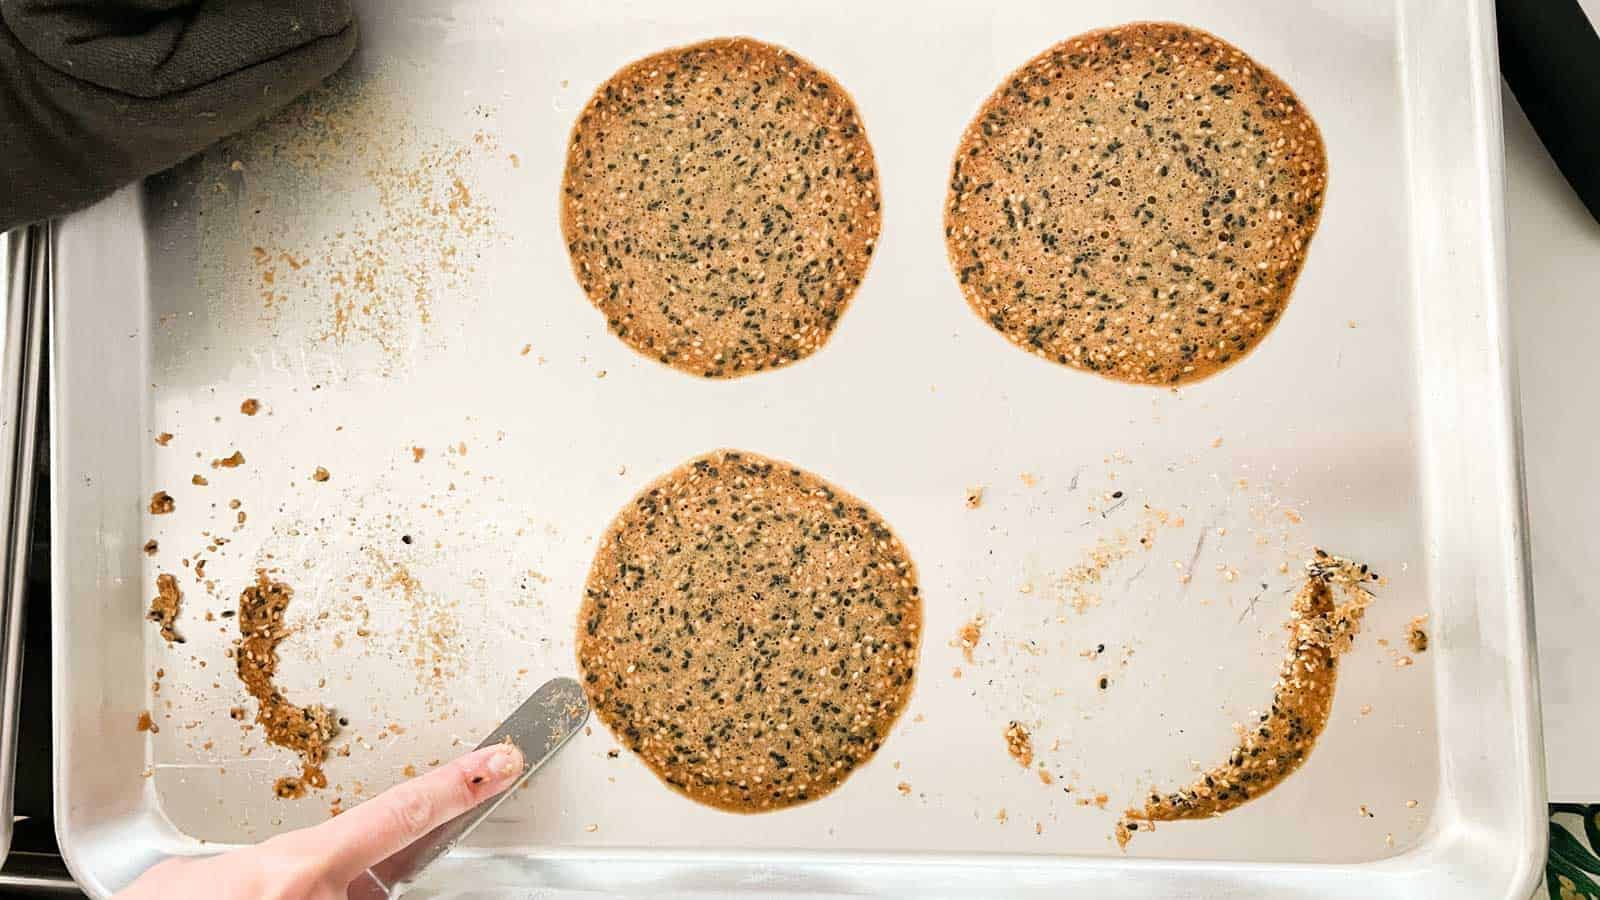 Cookies baked directly on baking sheet